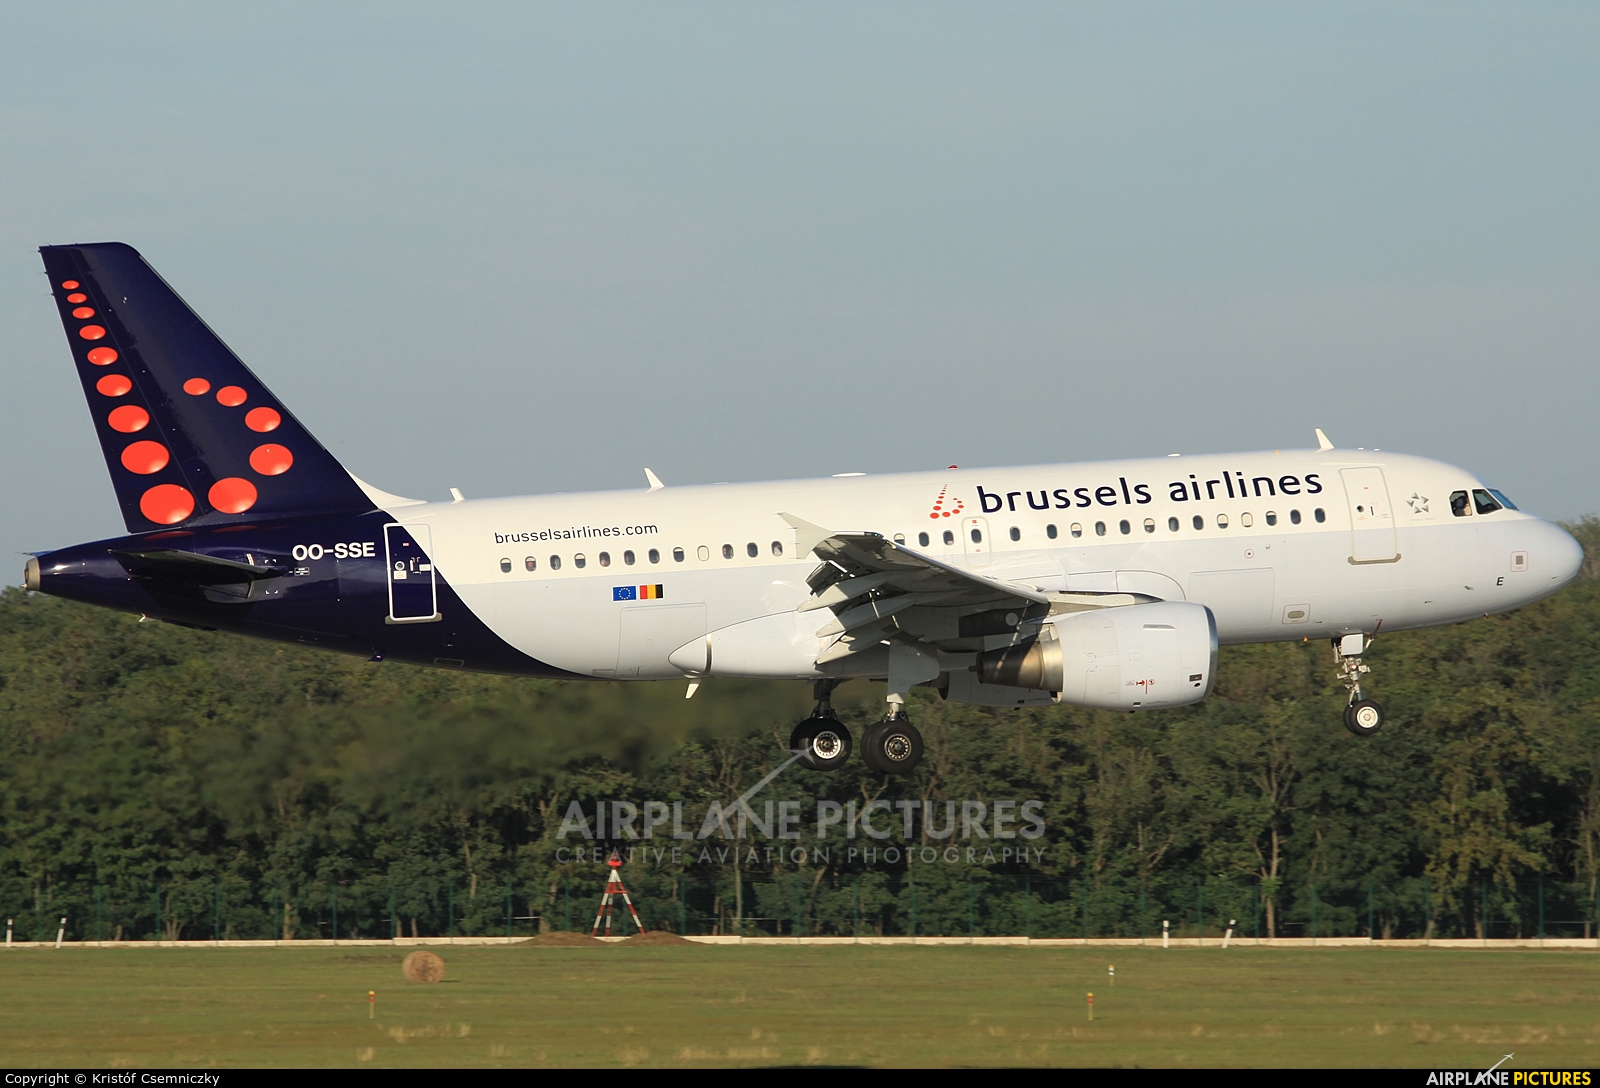 Brussels Airlines OO-SSE aircraft at Budapest Ferenc Liszt International Airport